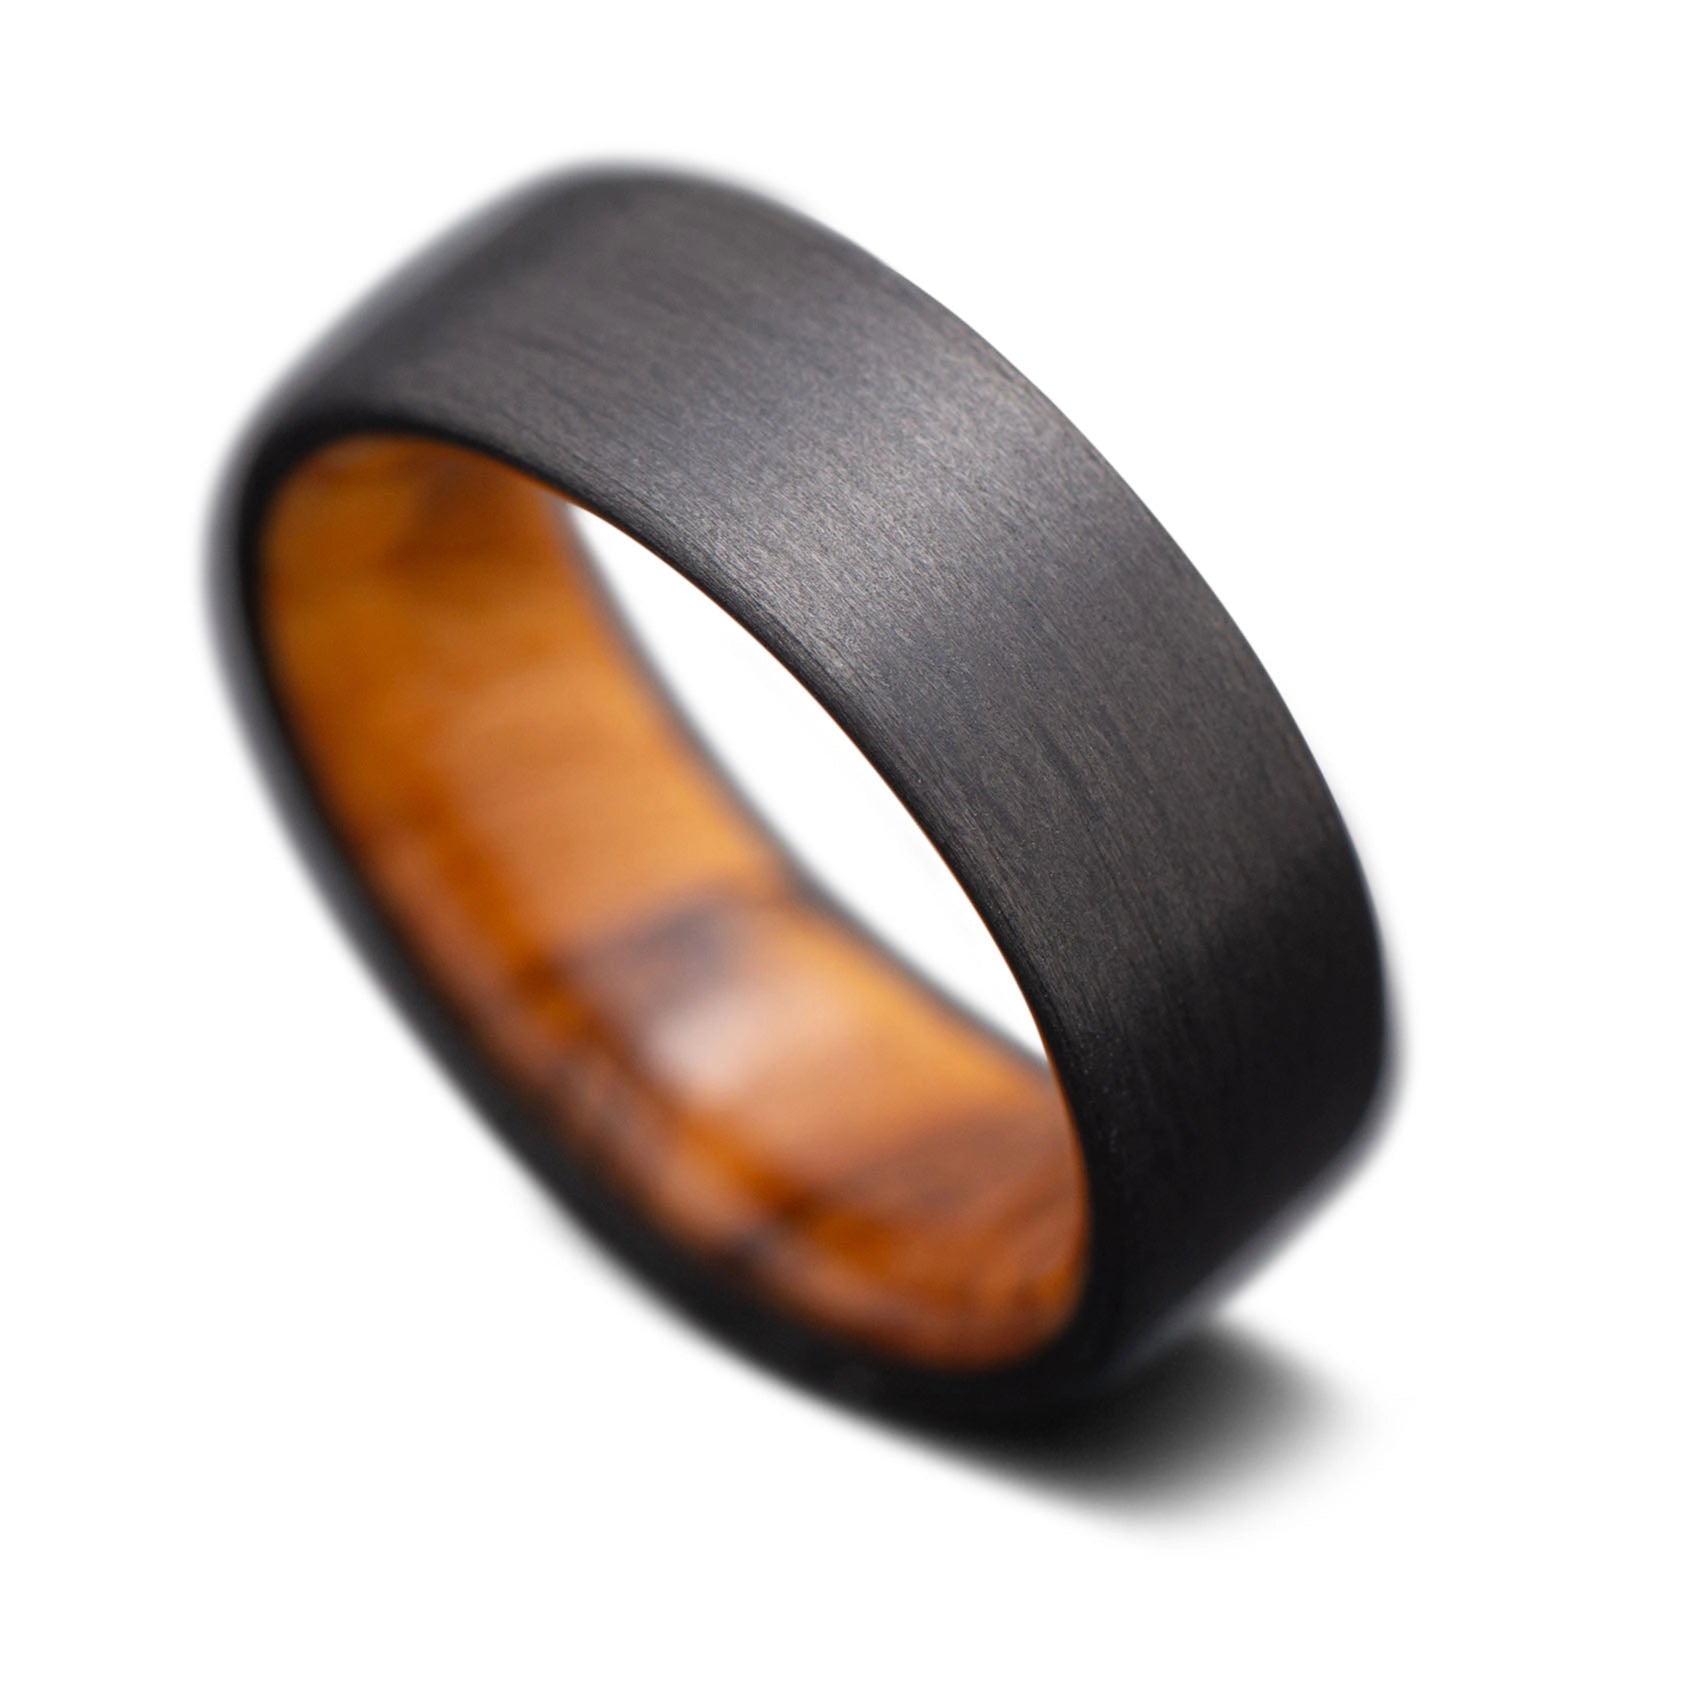 Carbon Fiber ring with Olivewood Inner sleeve, wedding ring.